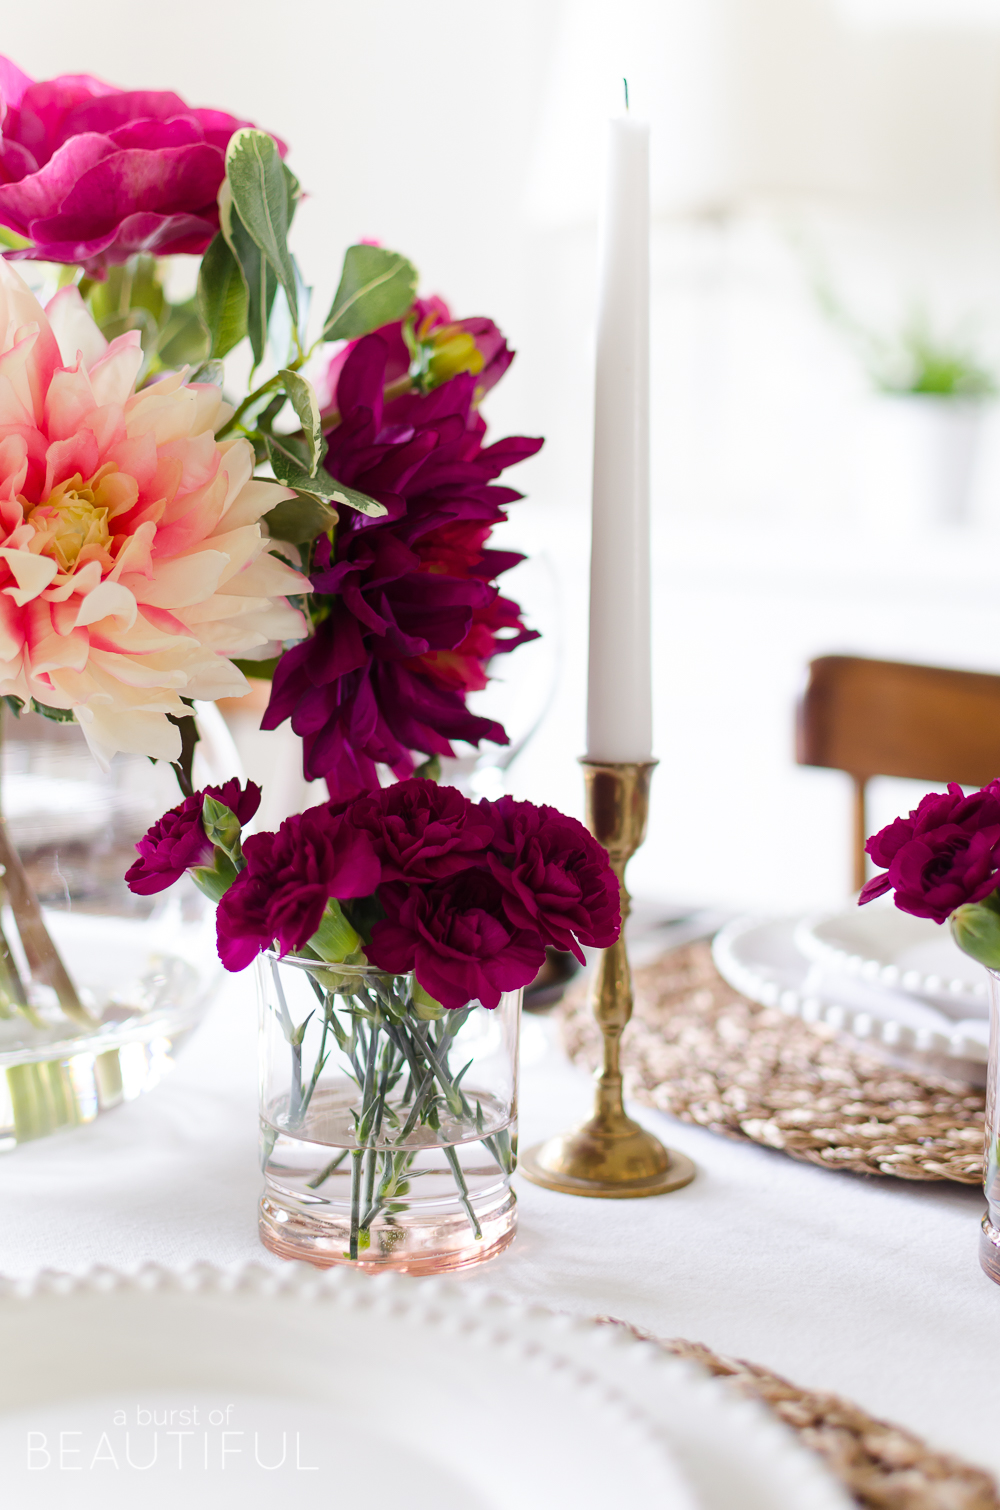 Celebrate with a simple and vibrant Mother's Day table setting